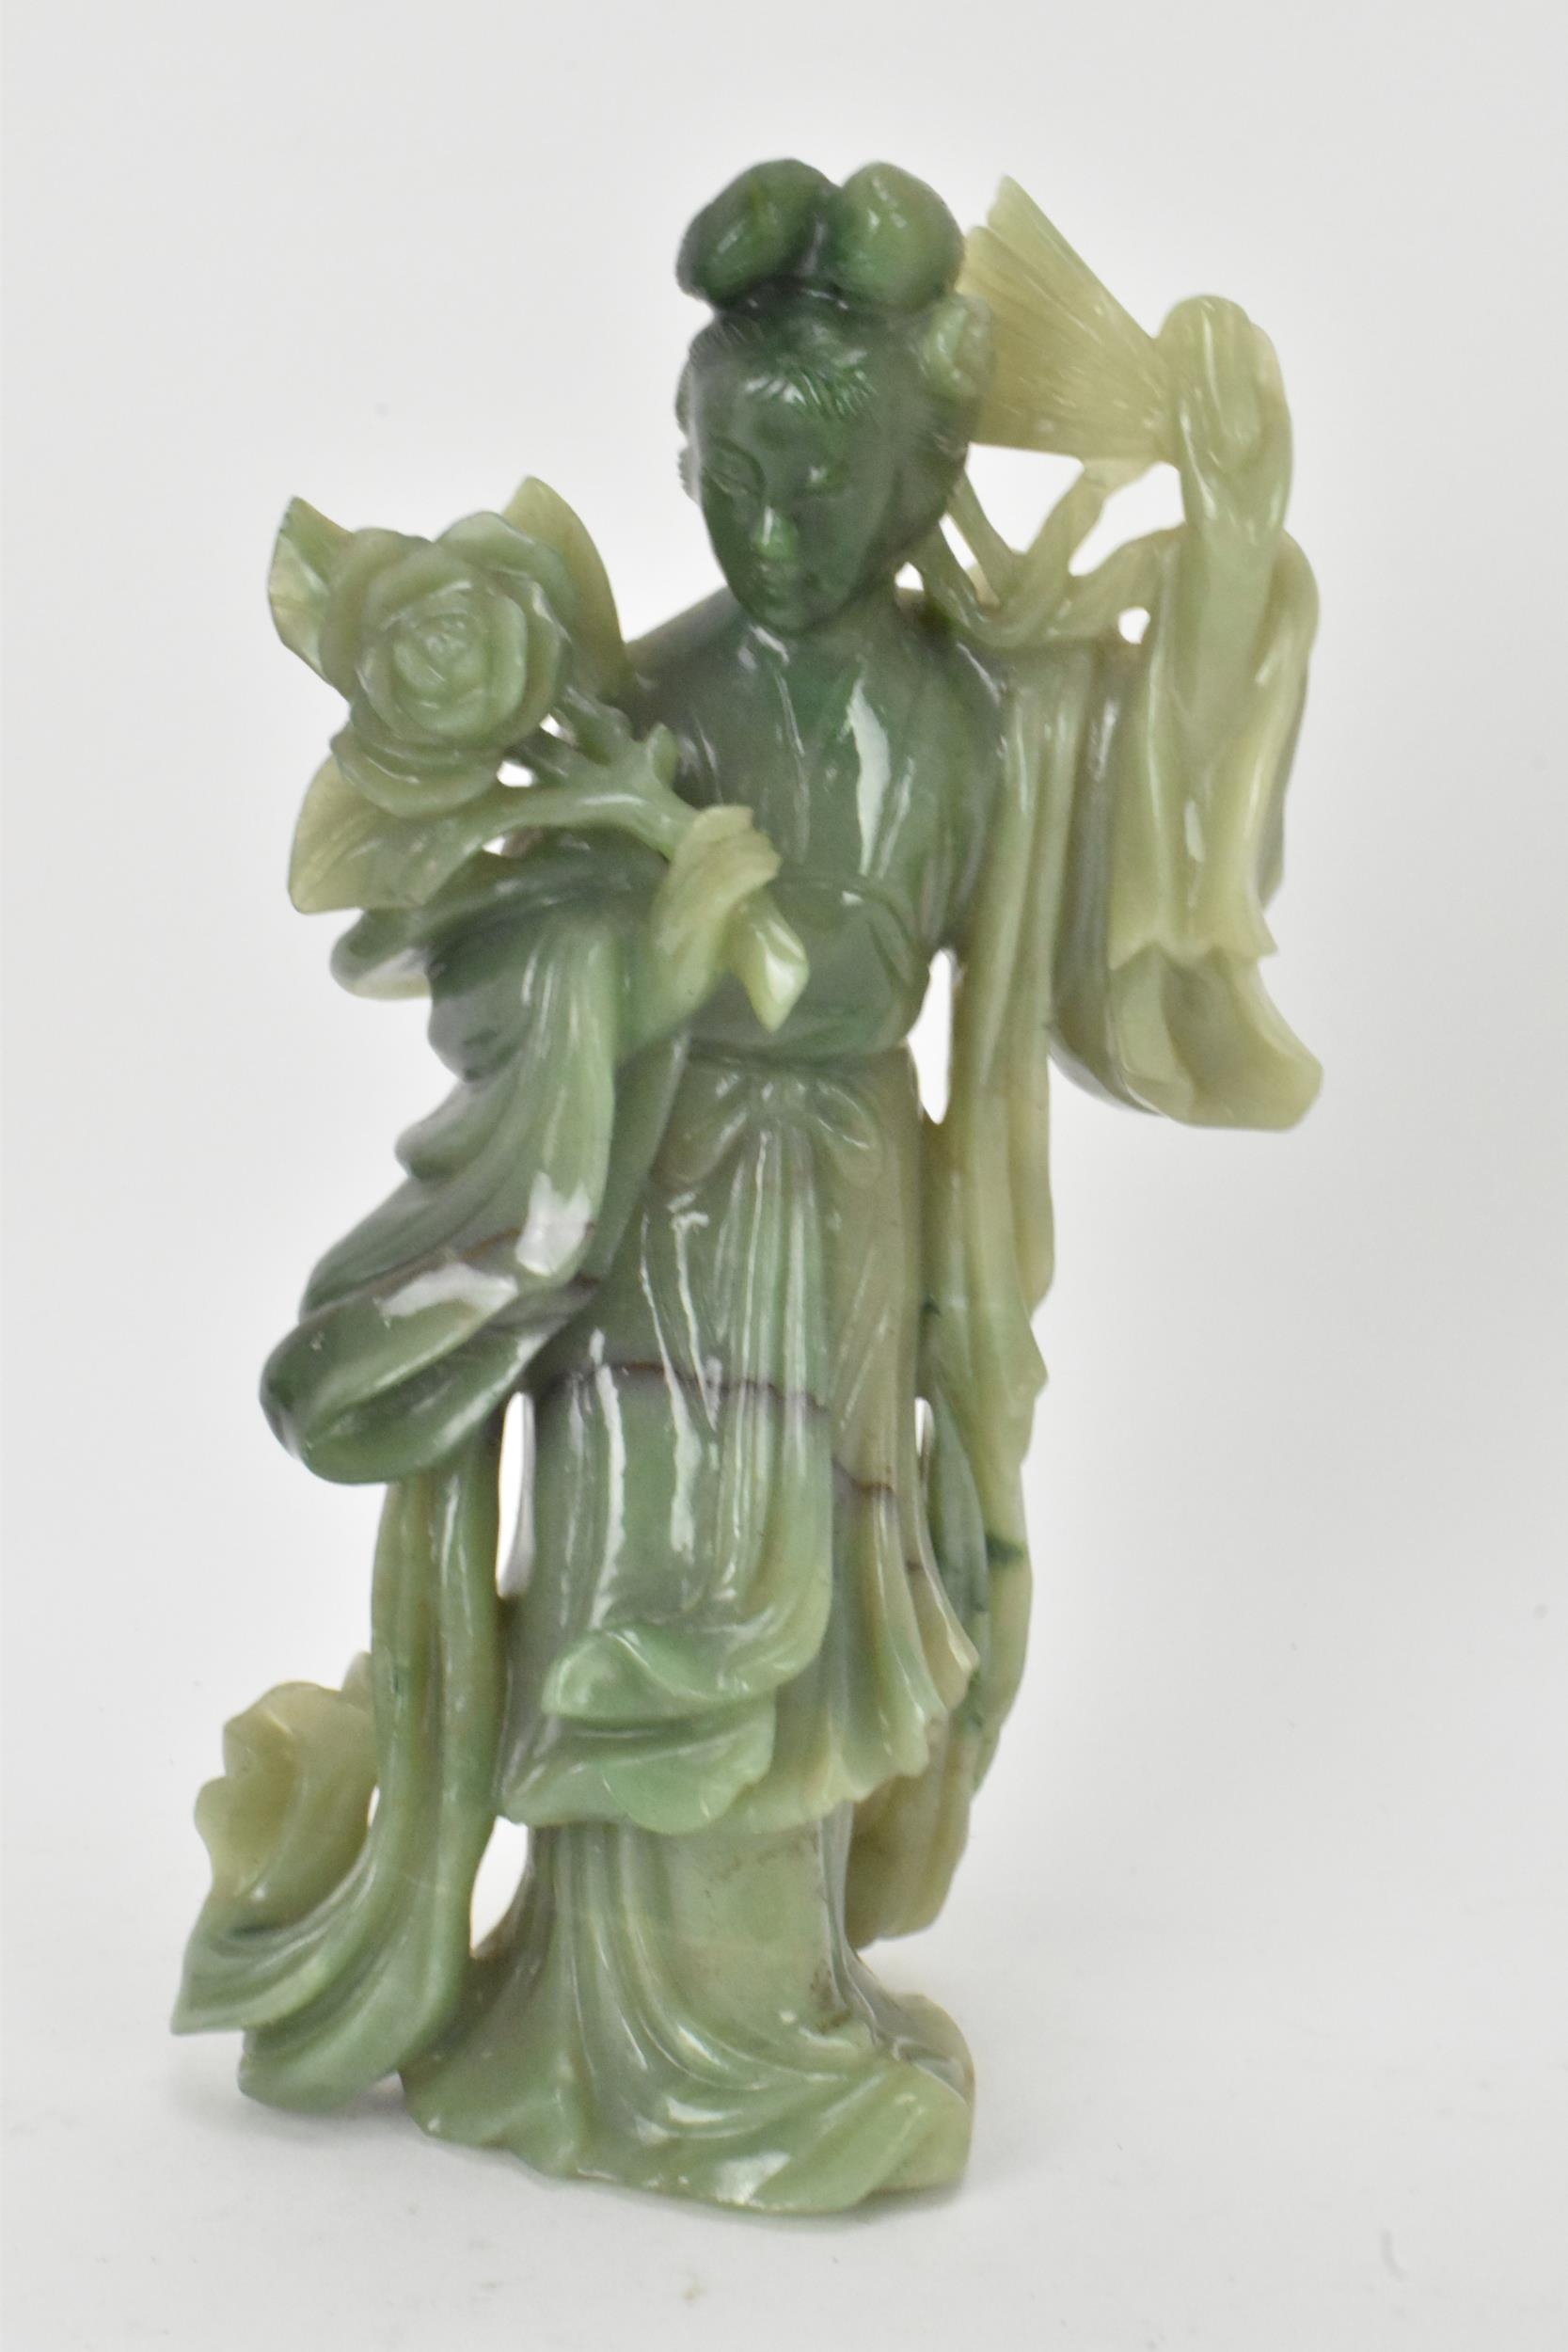 Two Chinese 20th century jadeite carved figures, the green example modeled holding a fan and flowers - Image 5 of 7